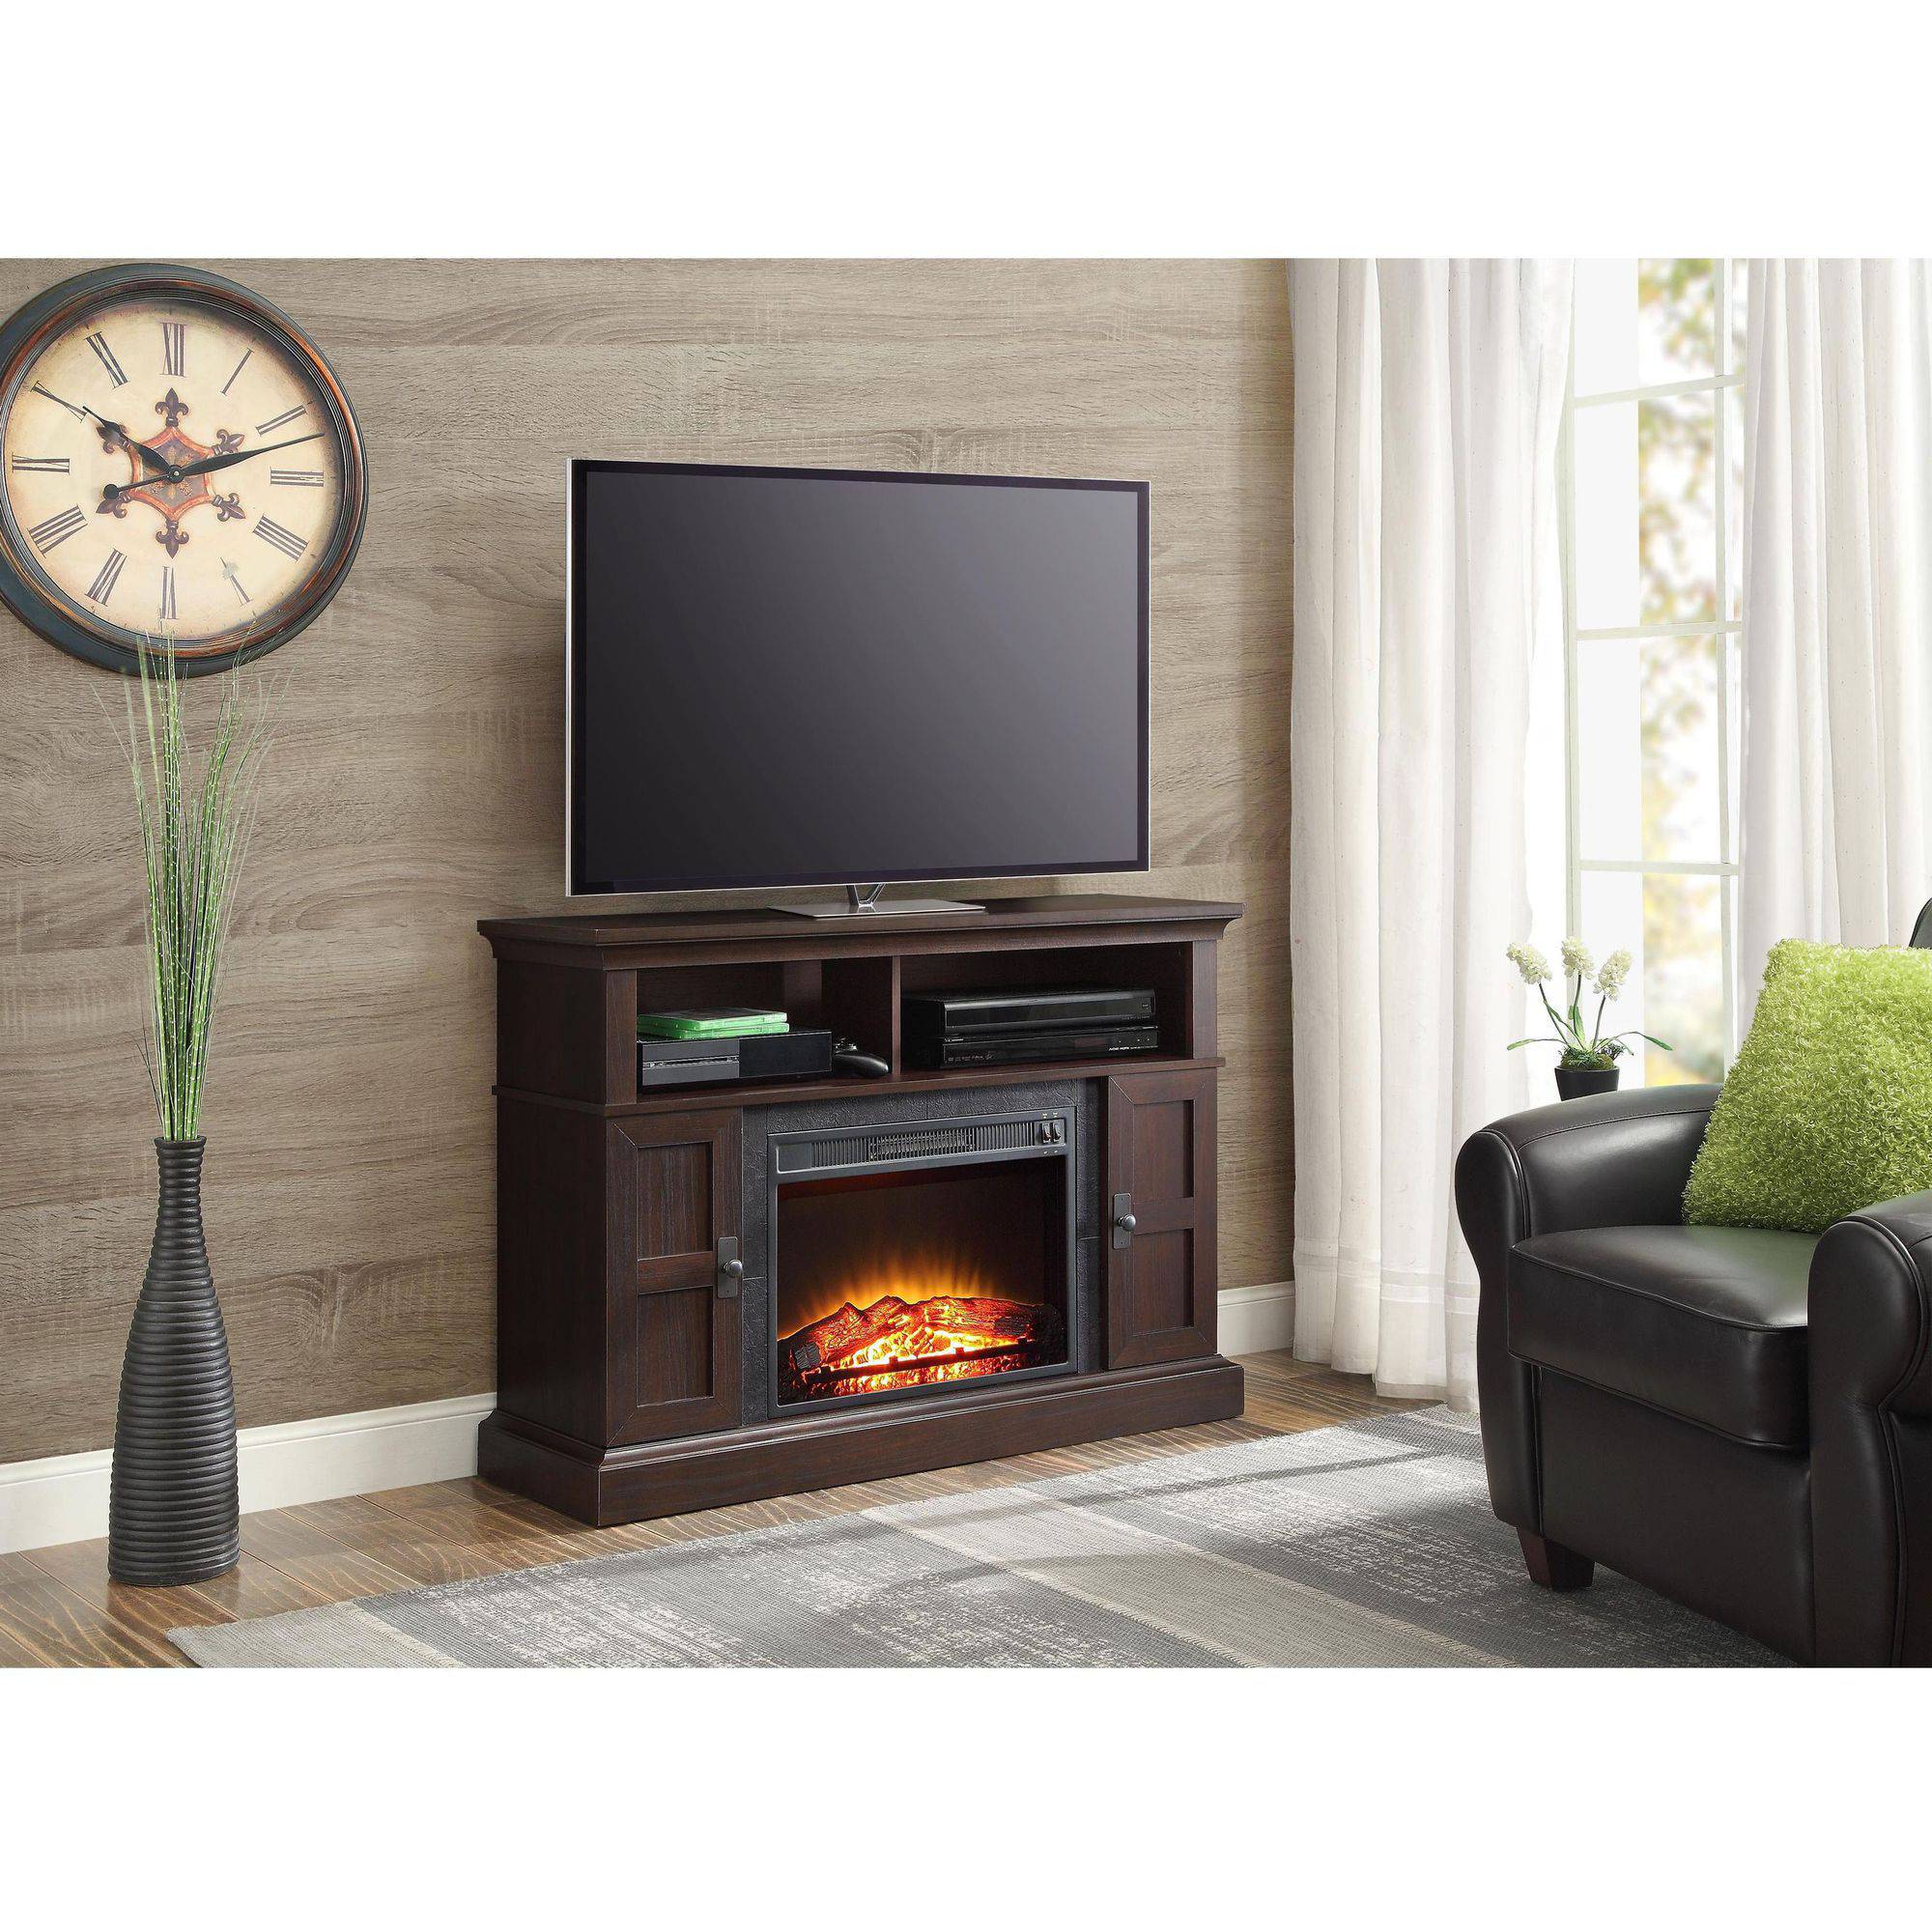 Fireplace Tv Stand for 65 Inch Tv Unique Fireplace Tv Stand for 55 Tv